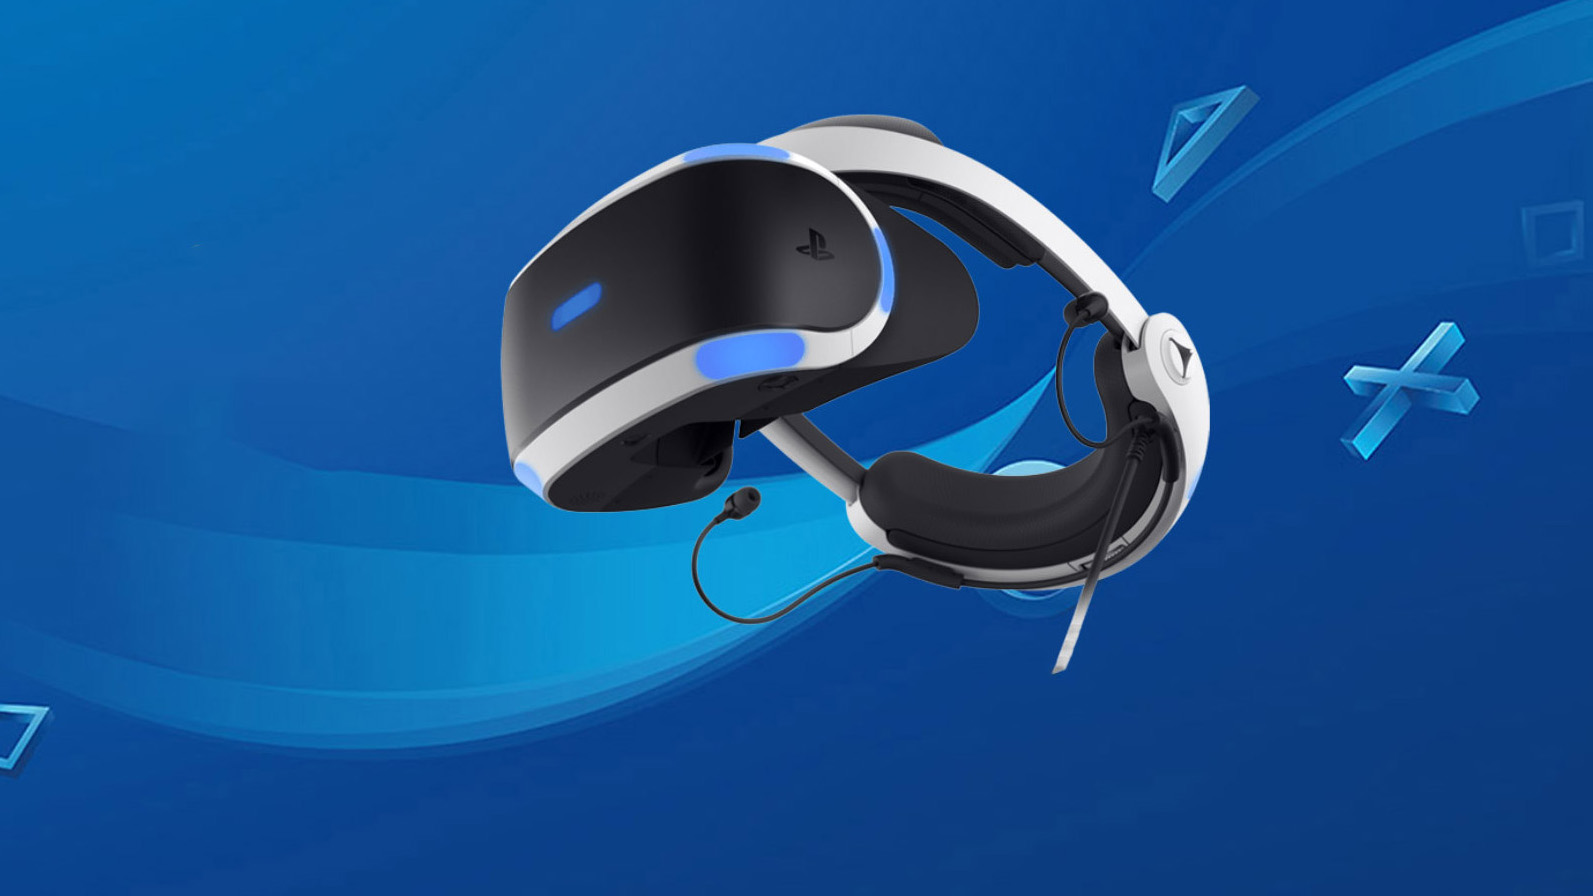 ps5 vr 2 release date